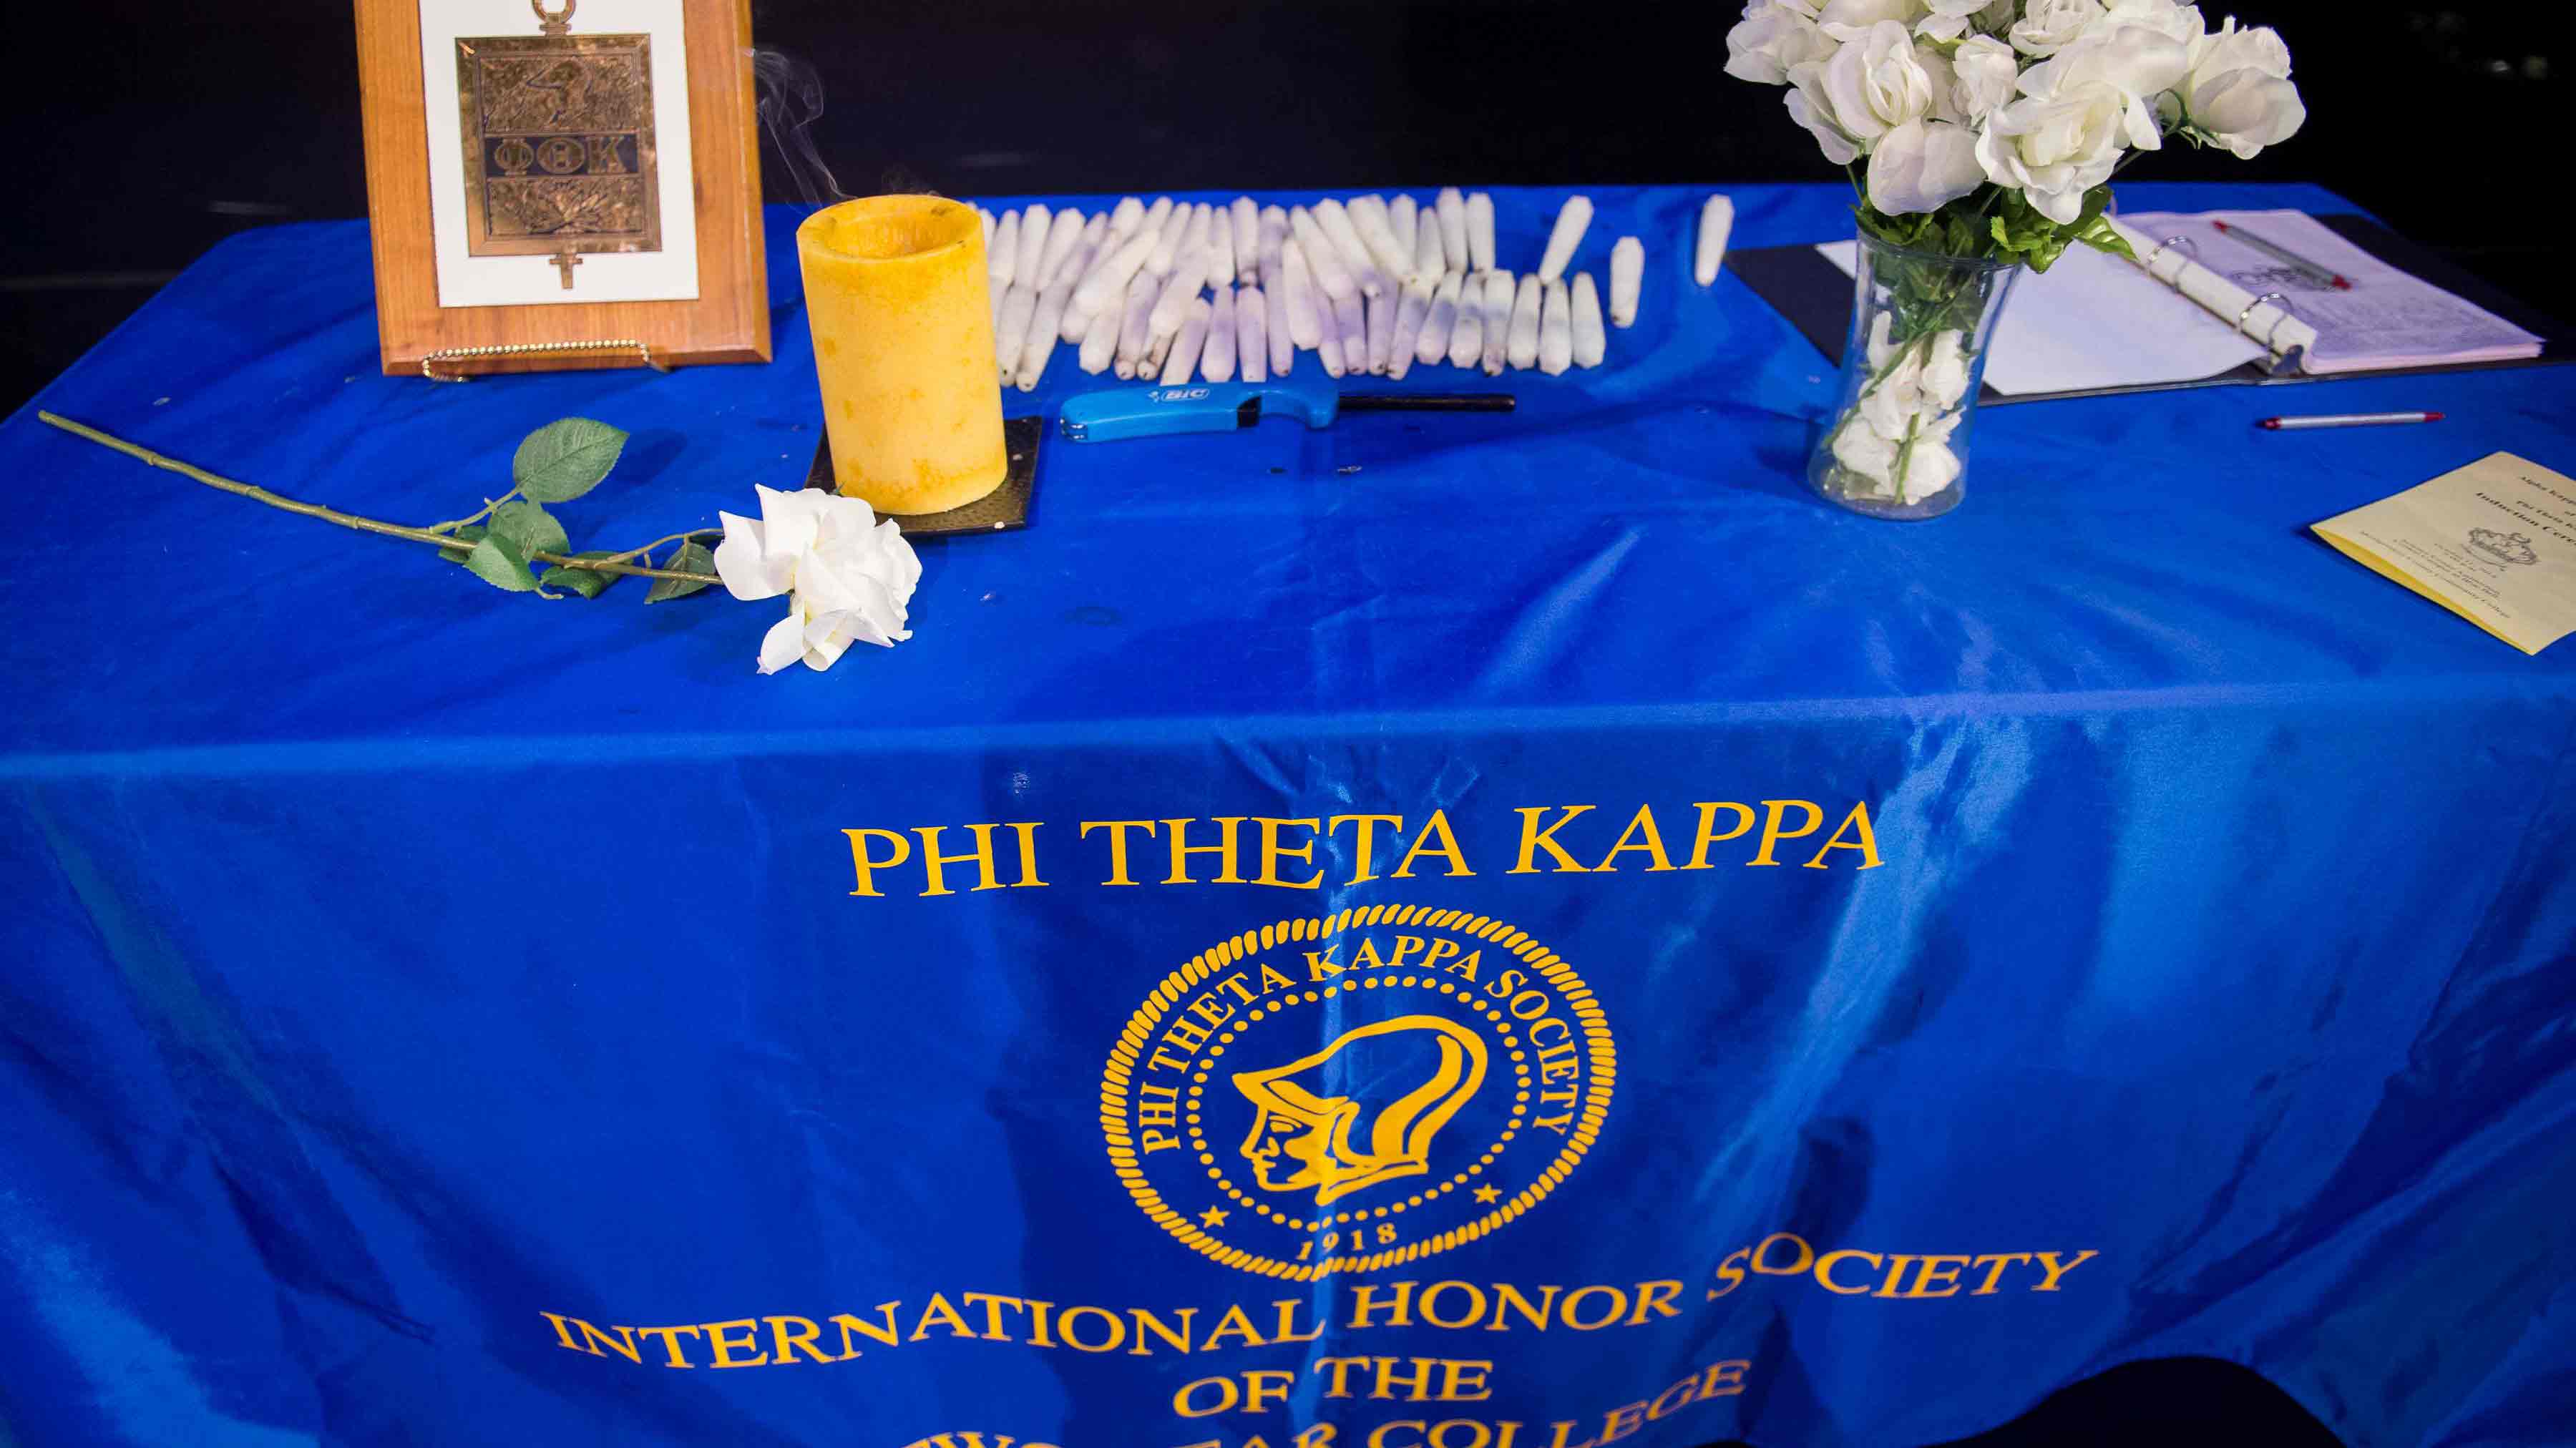 To be eligible for PTK membership, students have to earn a minimum of 12 credits, maintain a grade point average of 3.5 or higher, be of good moral character and possess recognized qualities of leadership.